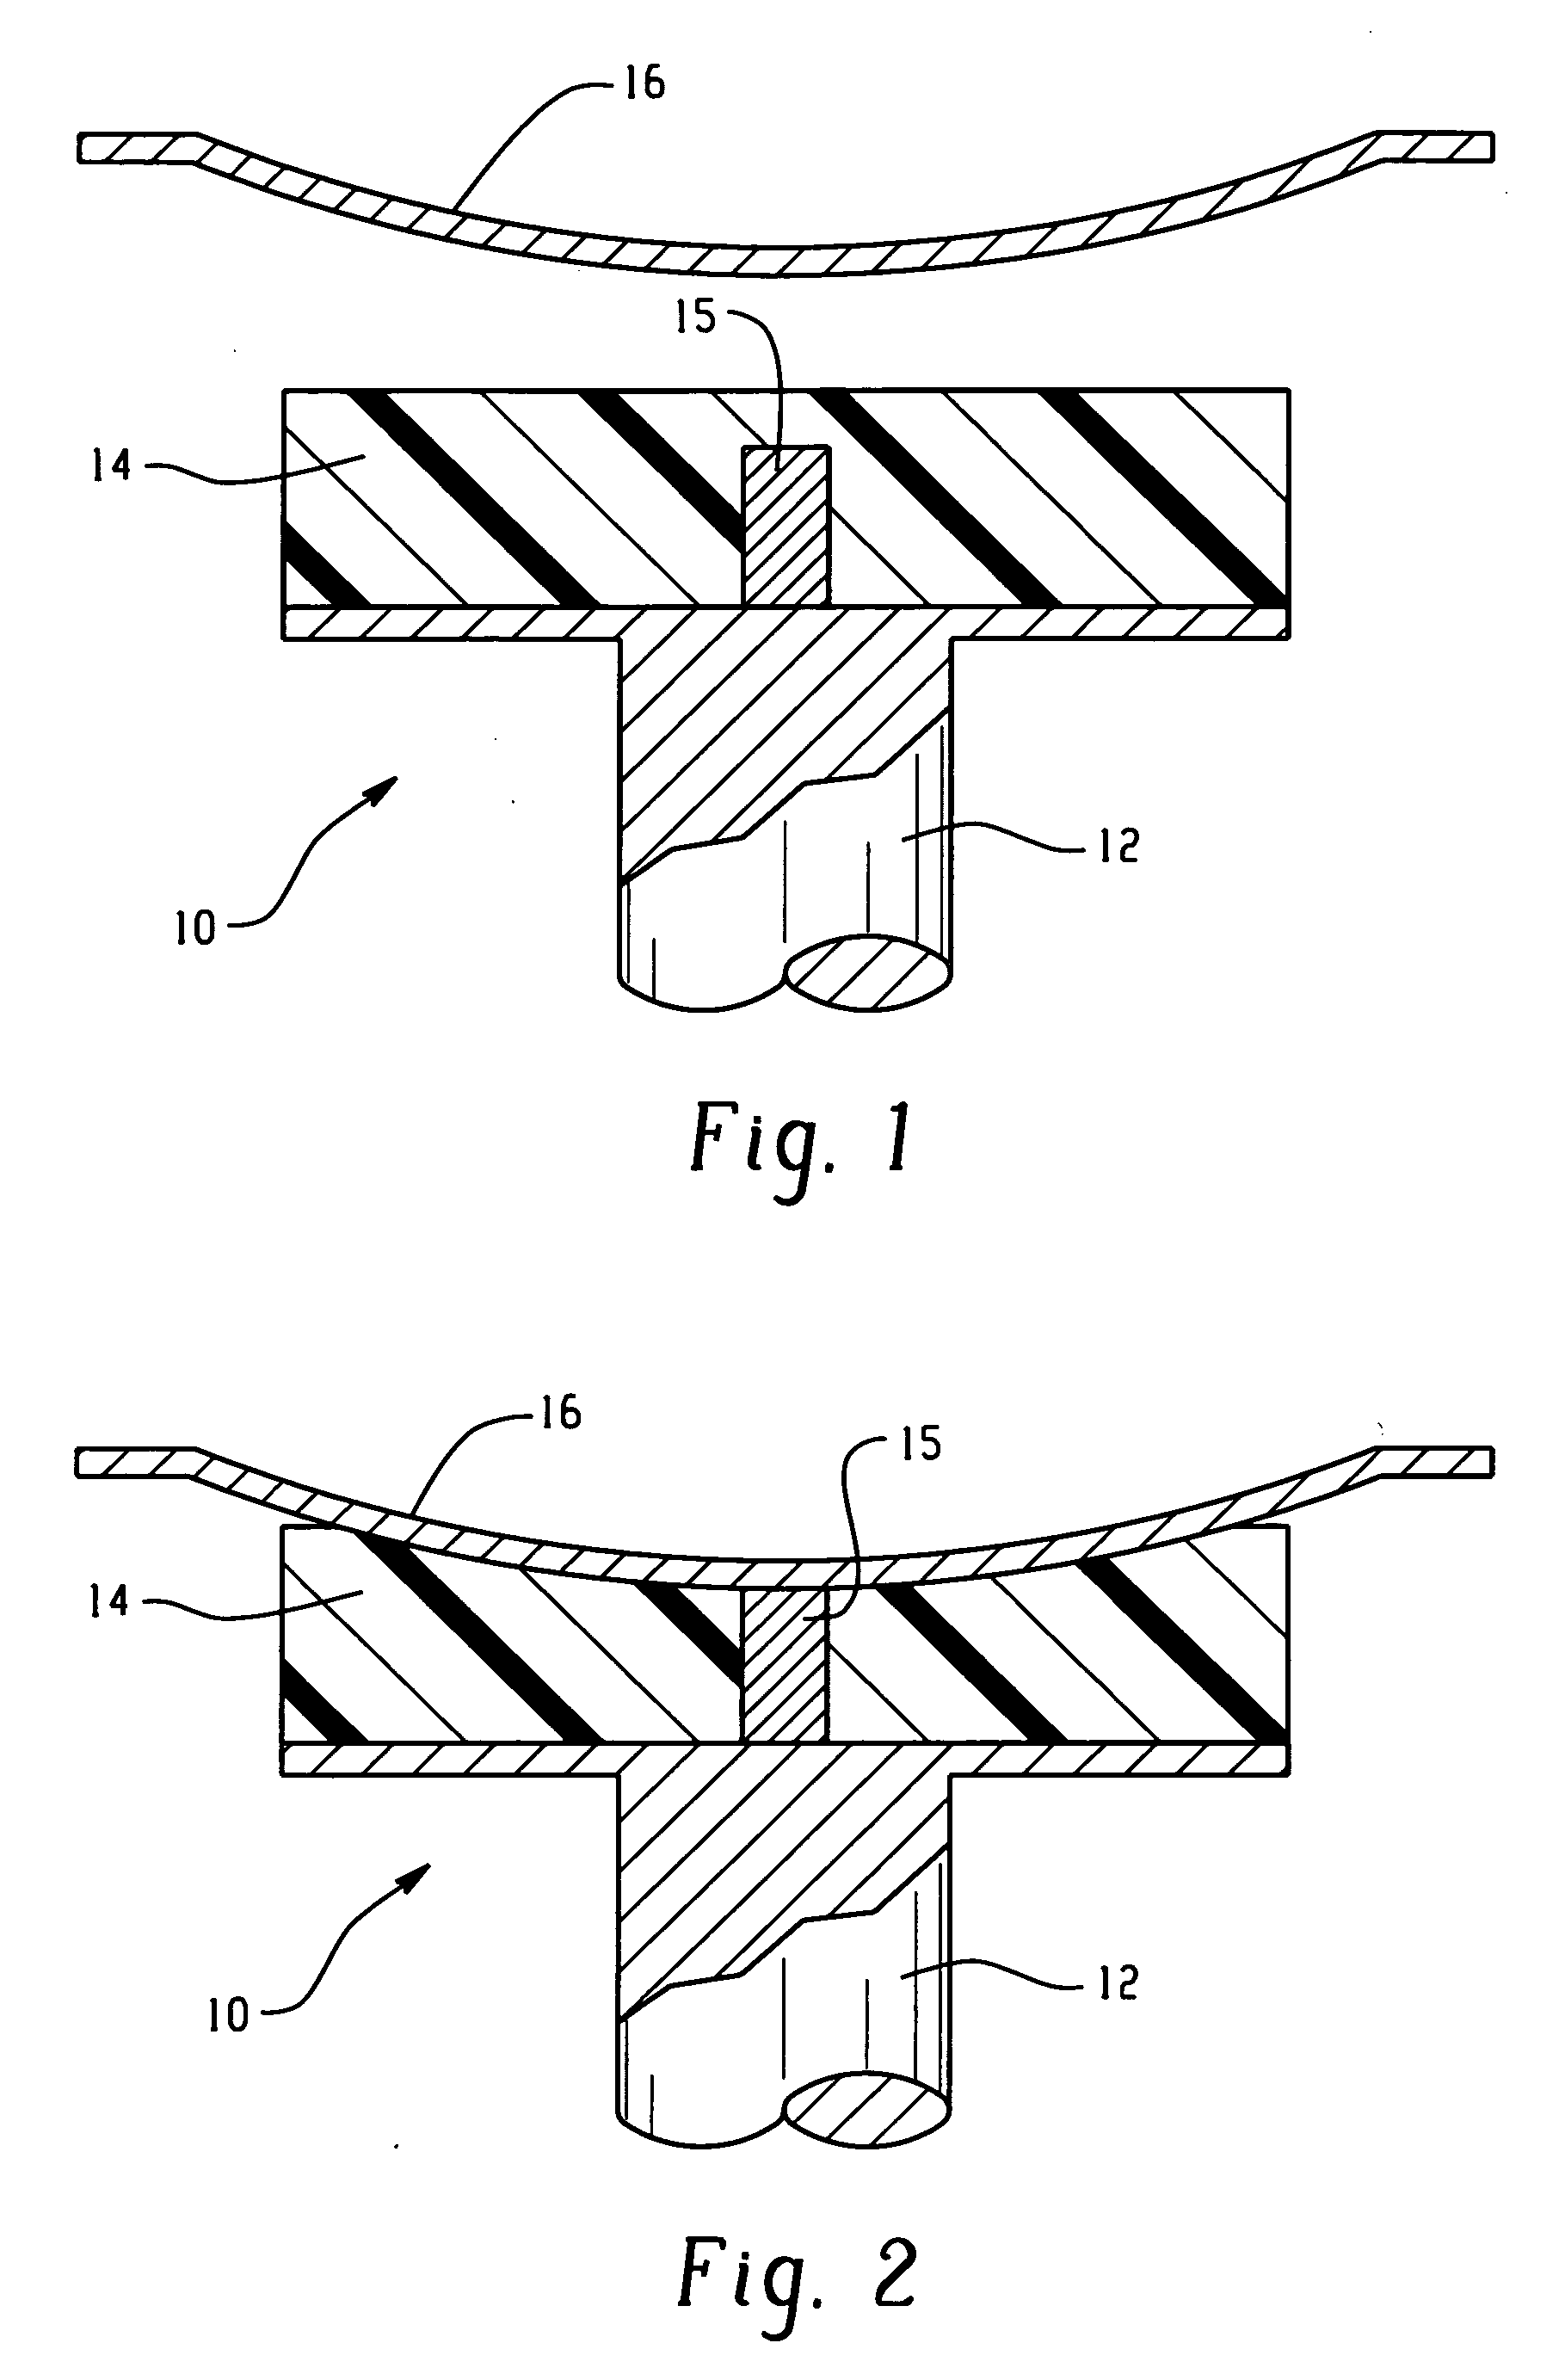 Reconfigurable fixture device and methods of use